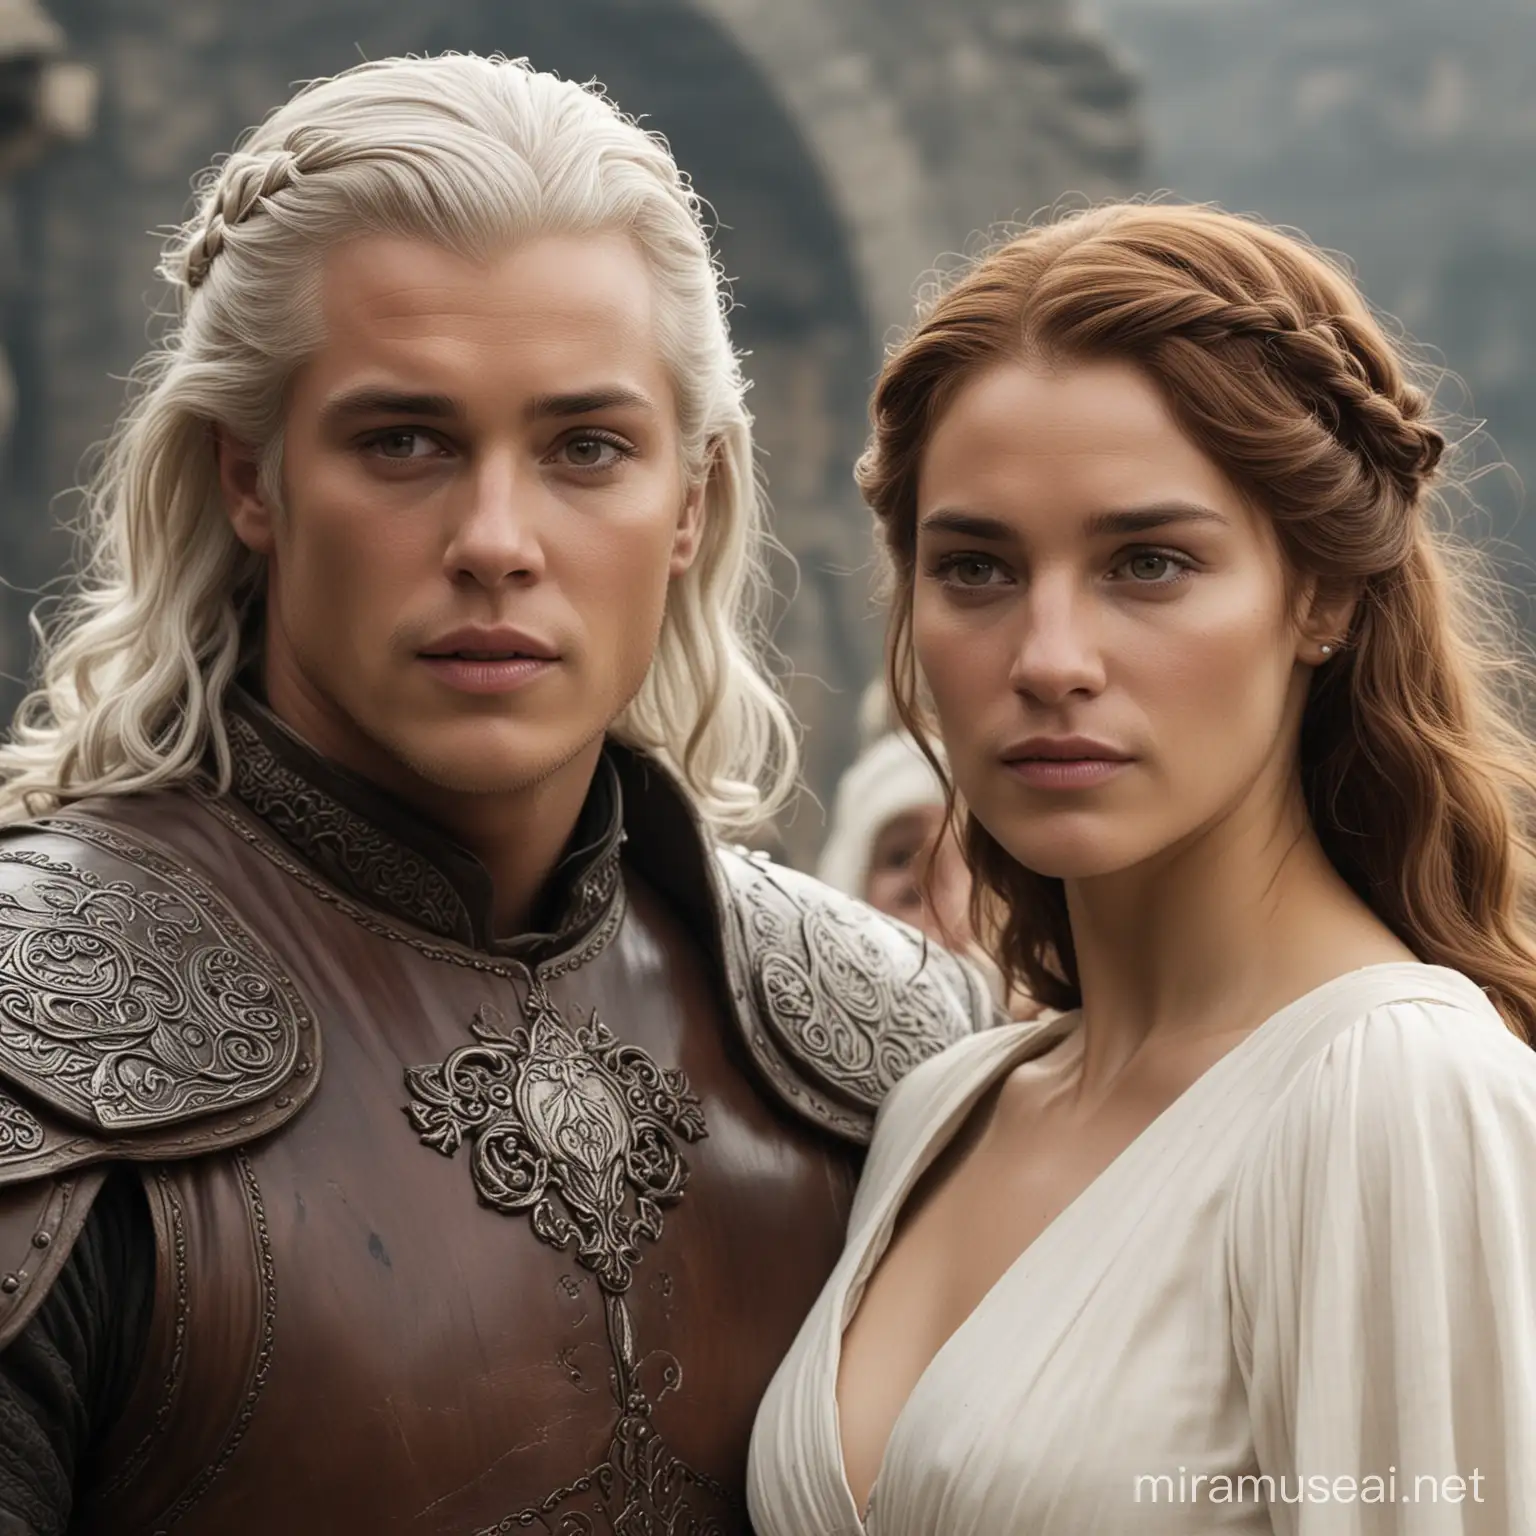 Taeron Targaryen and His BrownHaired Wife in a Regal Portrait